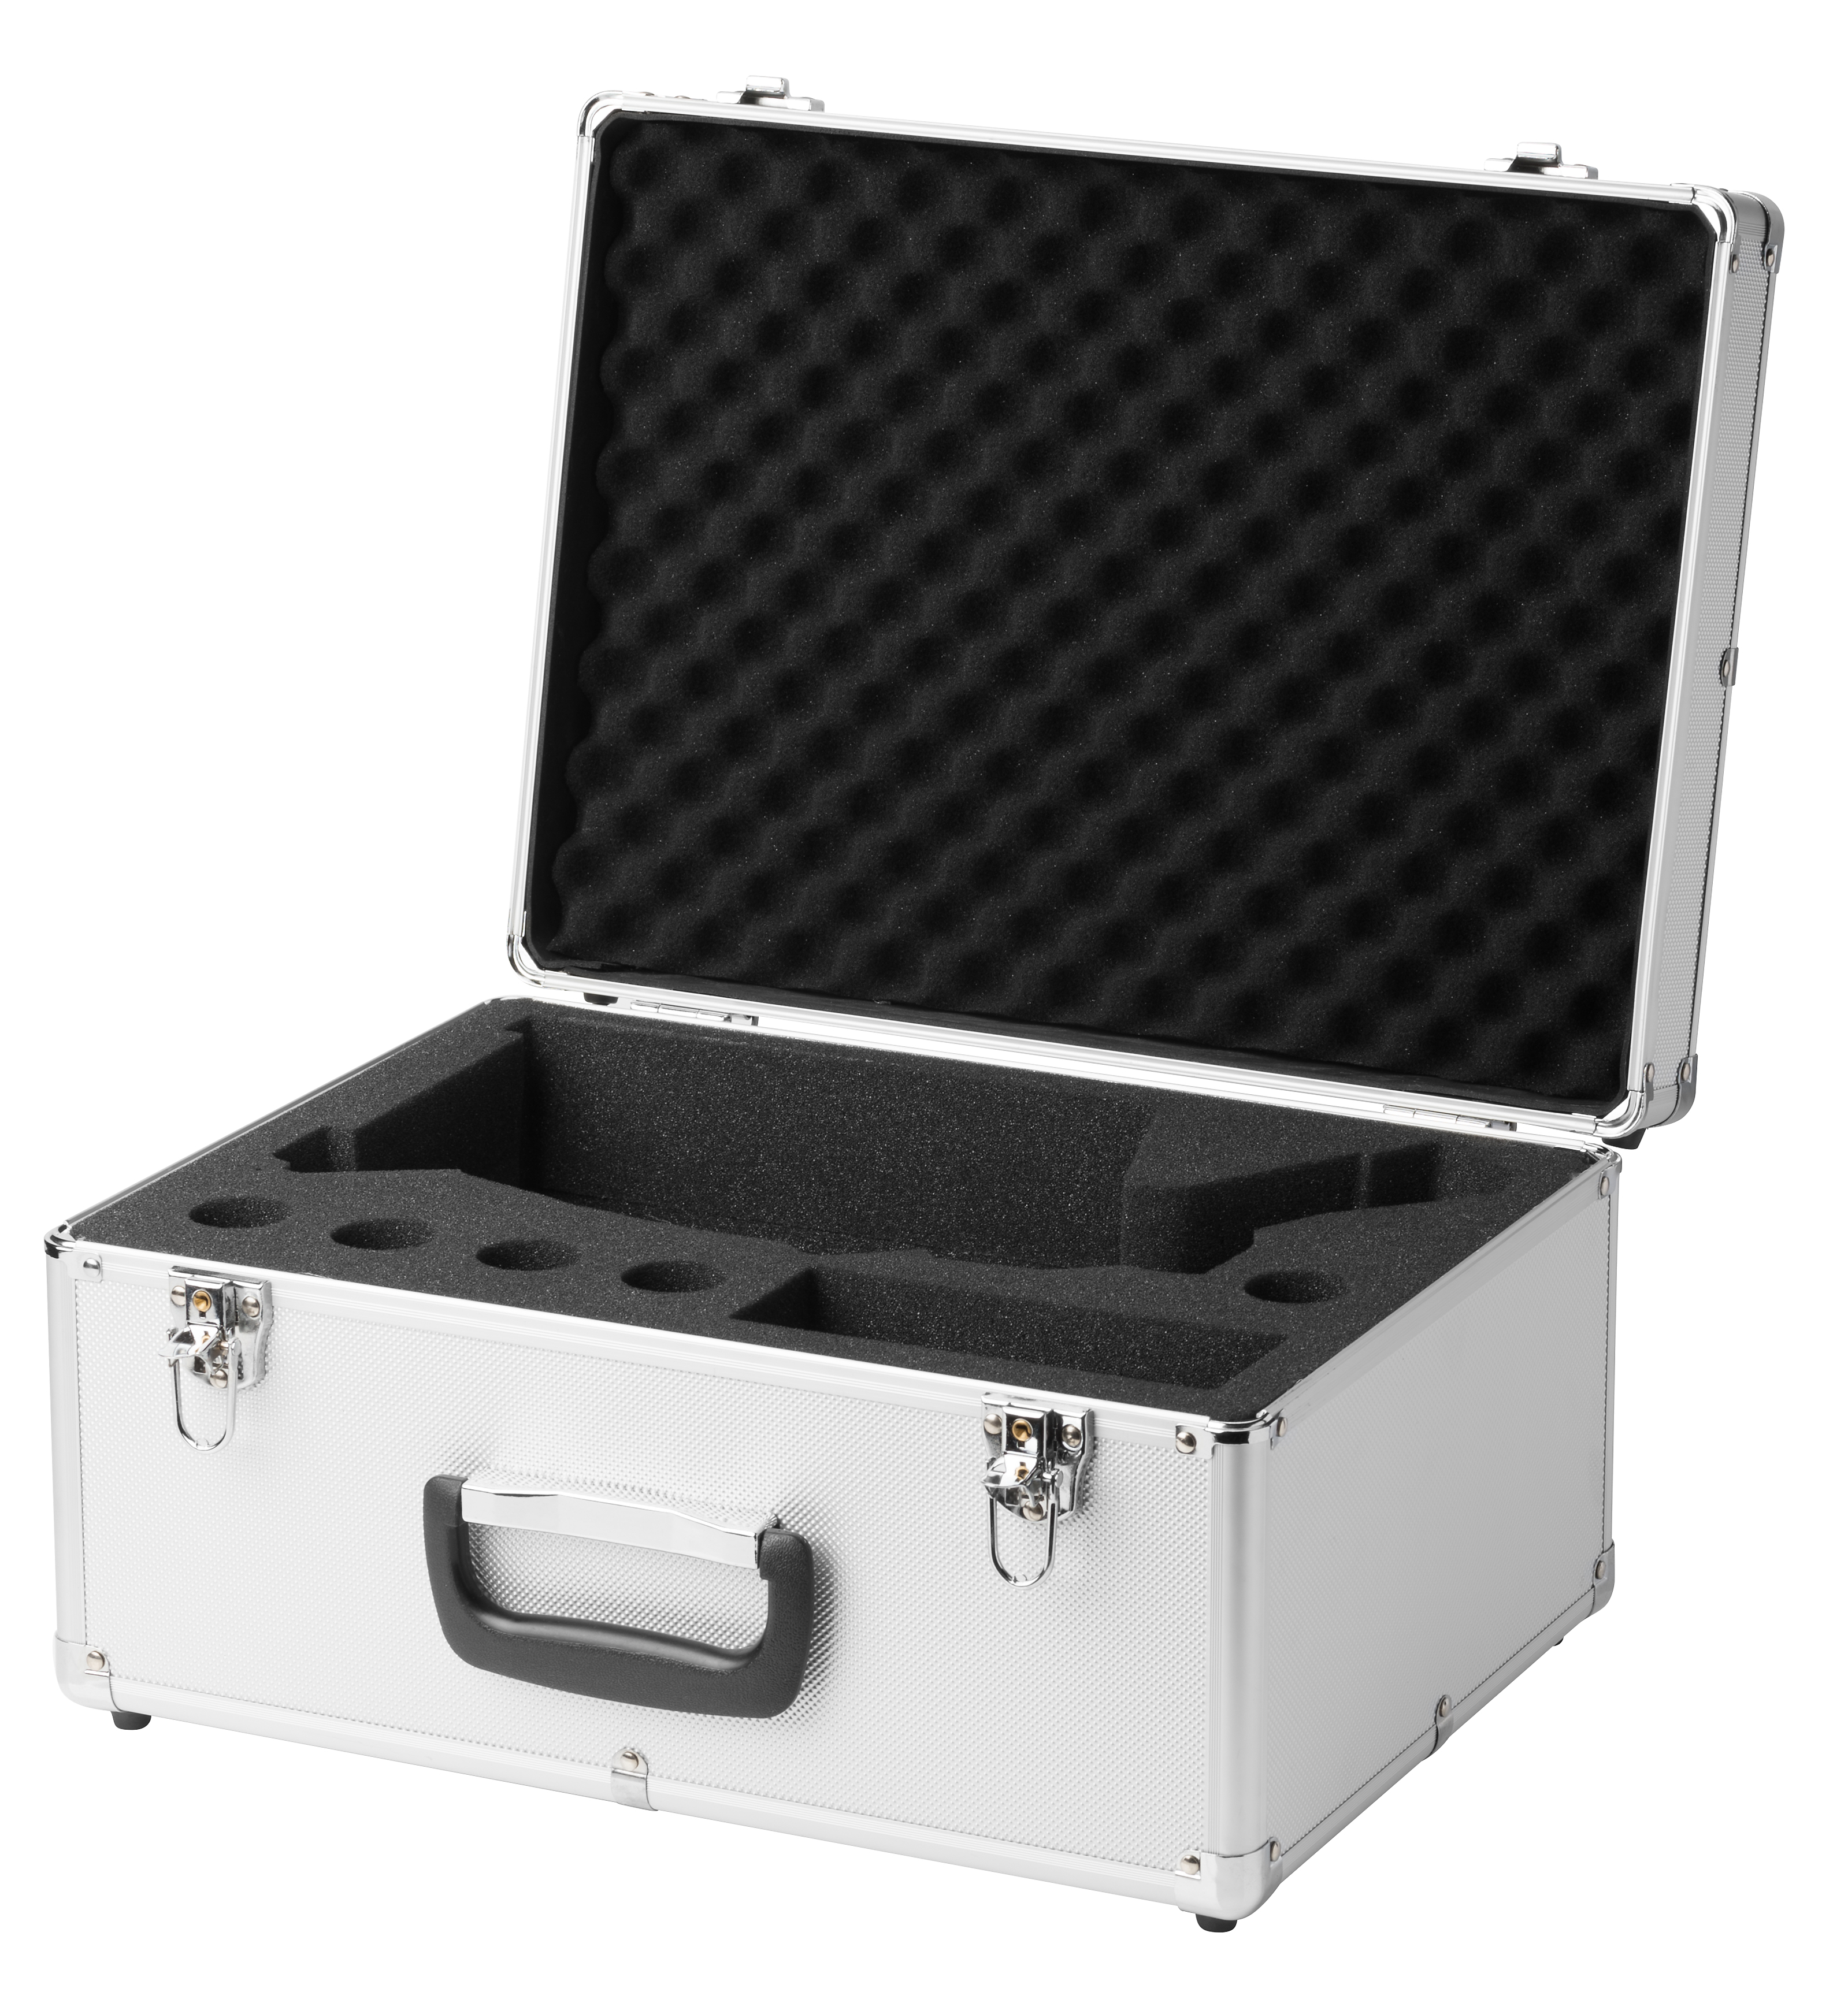 BRESSER Carry Case for Erudit DLX / Researcher microscopes